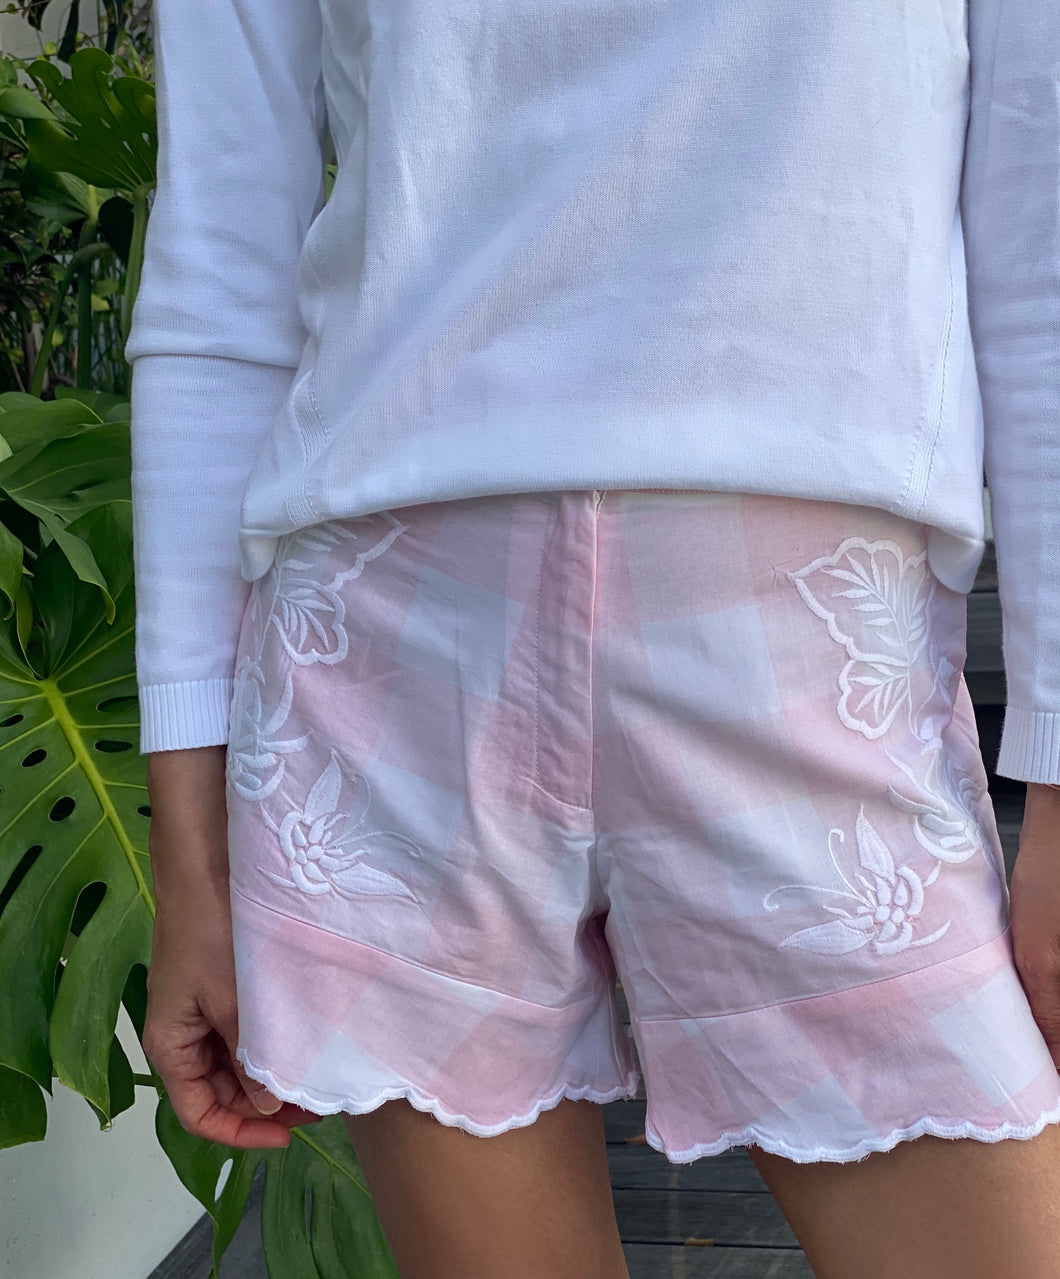 Juliet Dunn Gingham Emroidered Shorts in Pale Pink